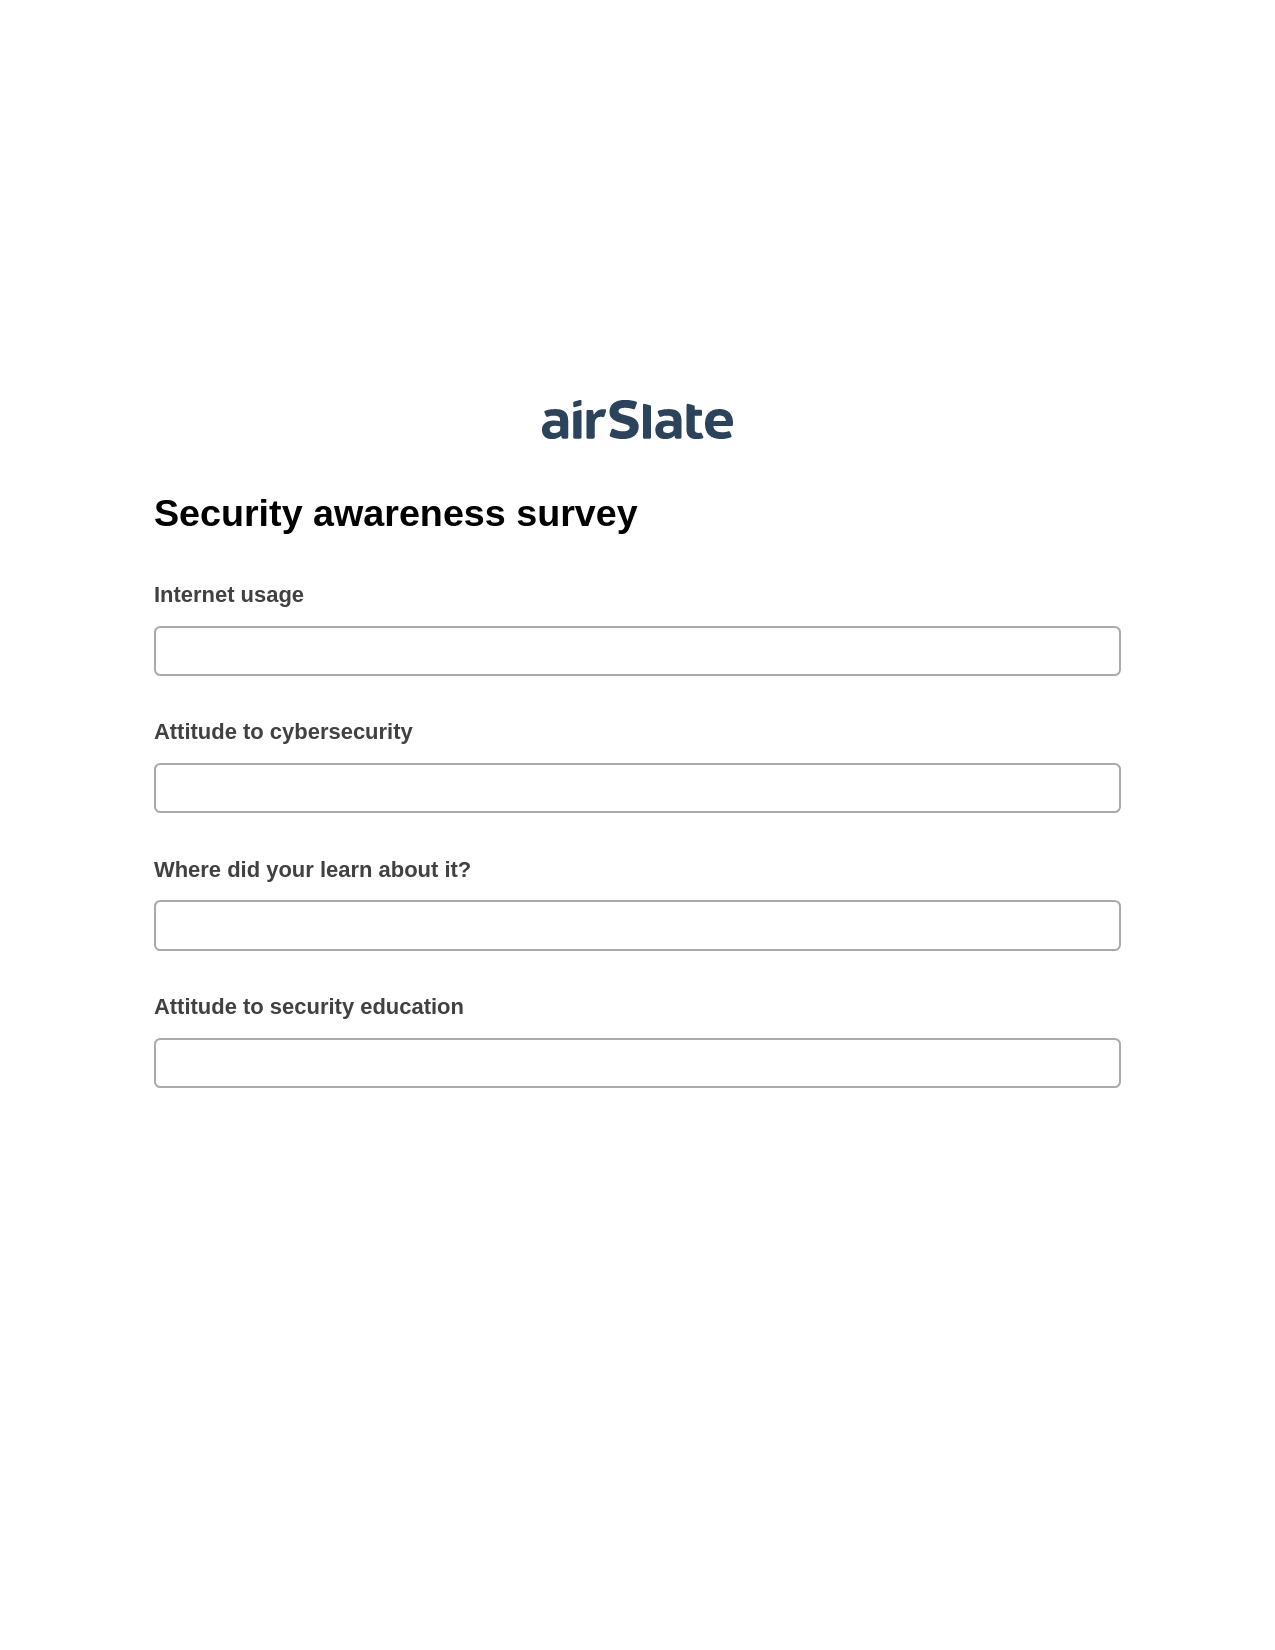 Security awareness survey Pre-fill from Salesforce Records with SOQL Bot, Open as Role Bot, Export to Smartsheet